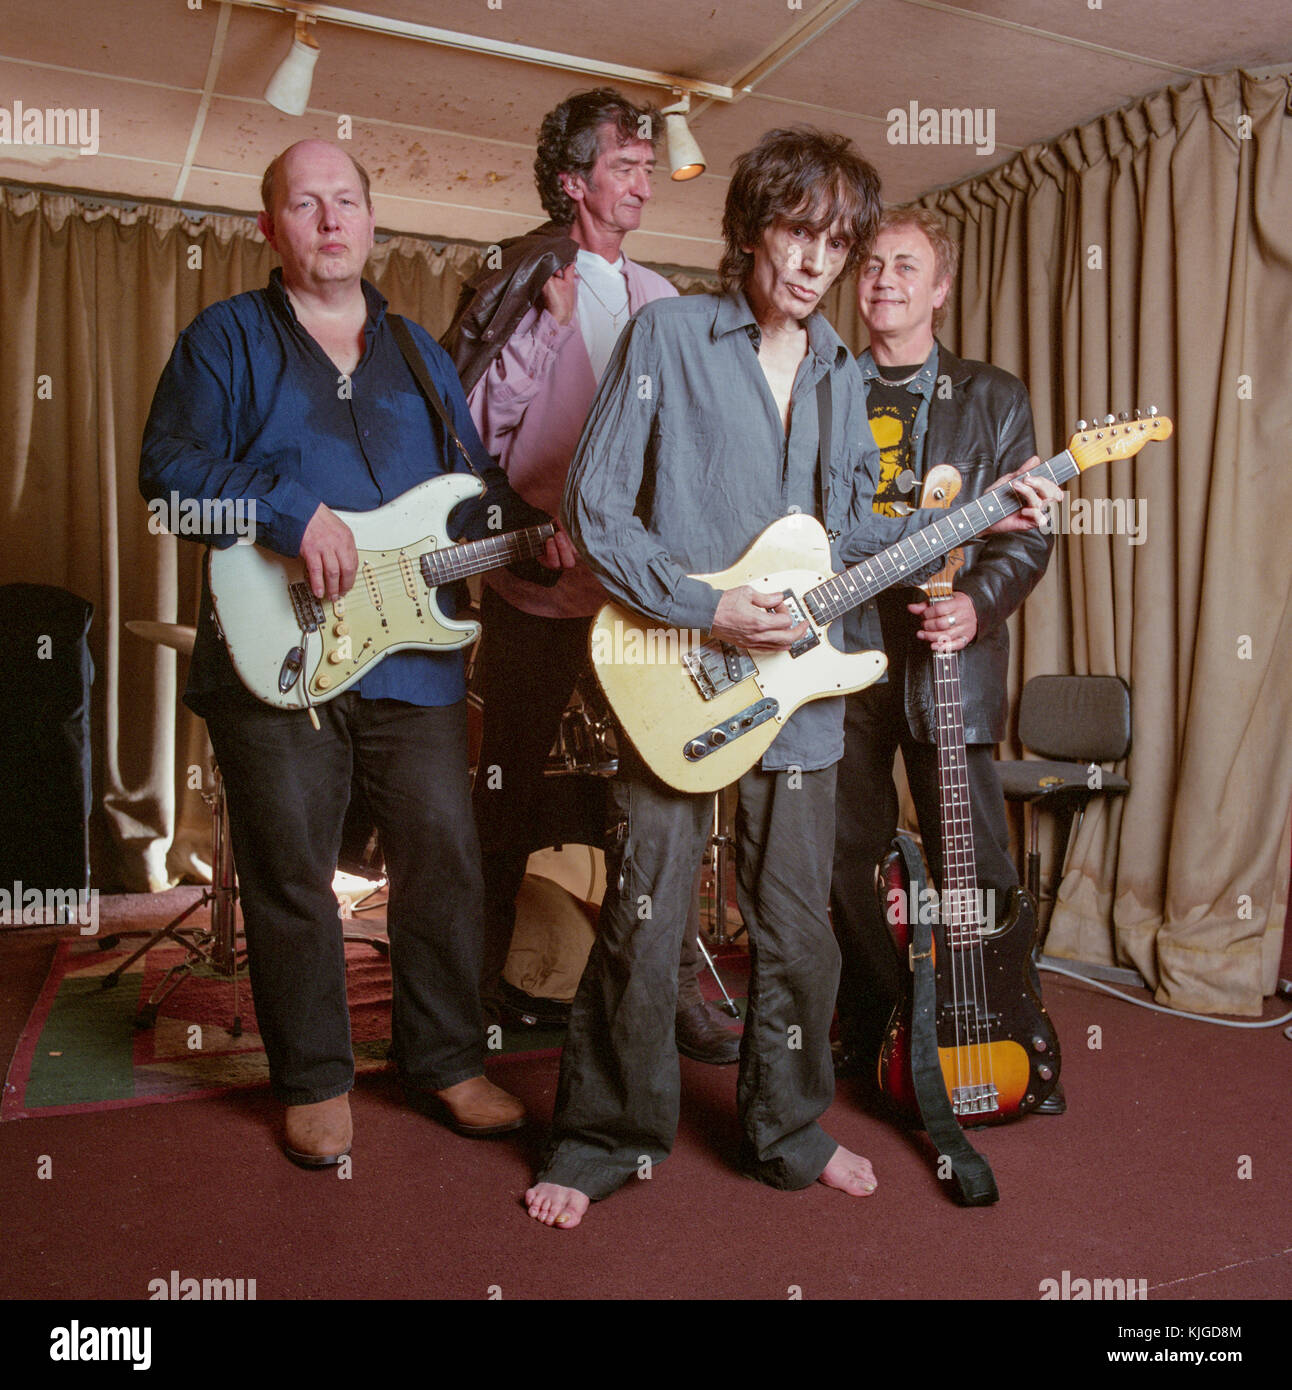 The Only Ones, An English rock band photographed in their rehearsal studios  after reforming in 2007, London, England, United Kingdom Stock Photo - Alamy